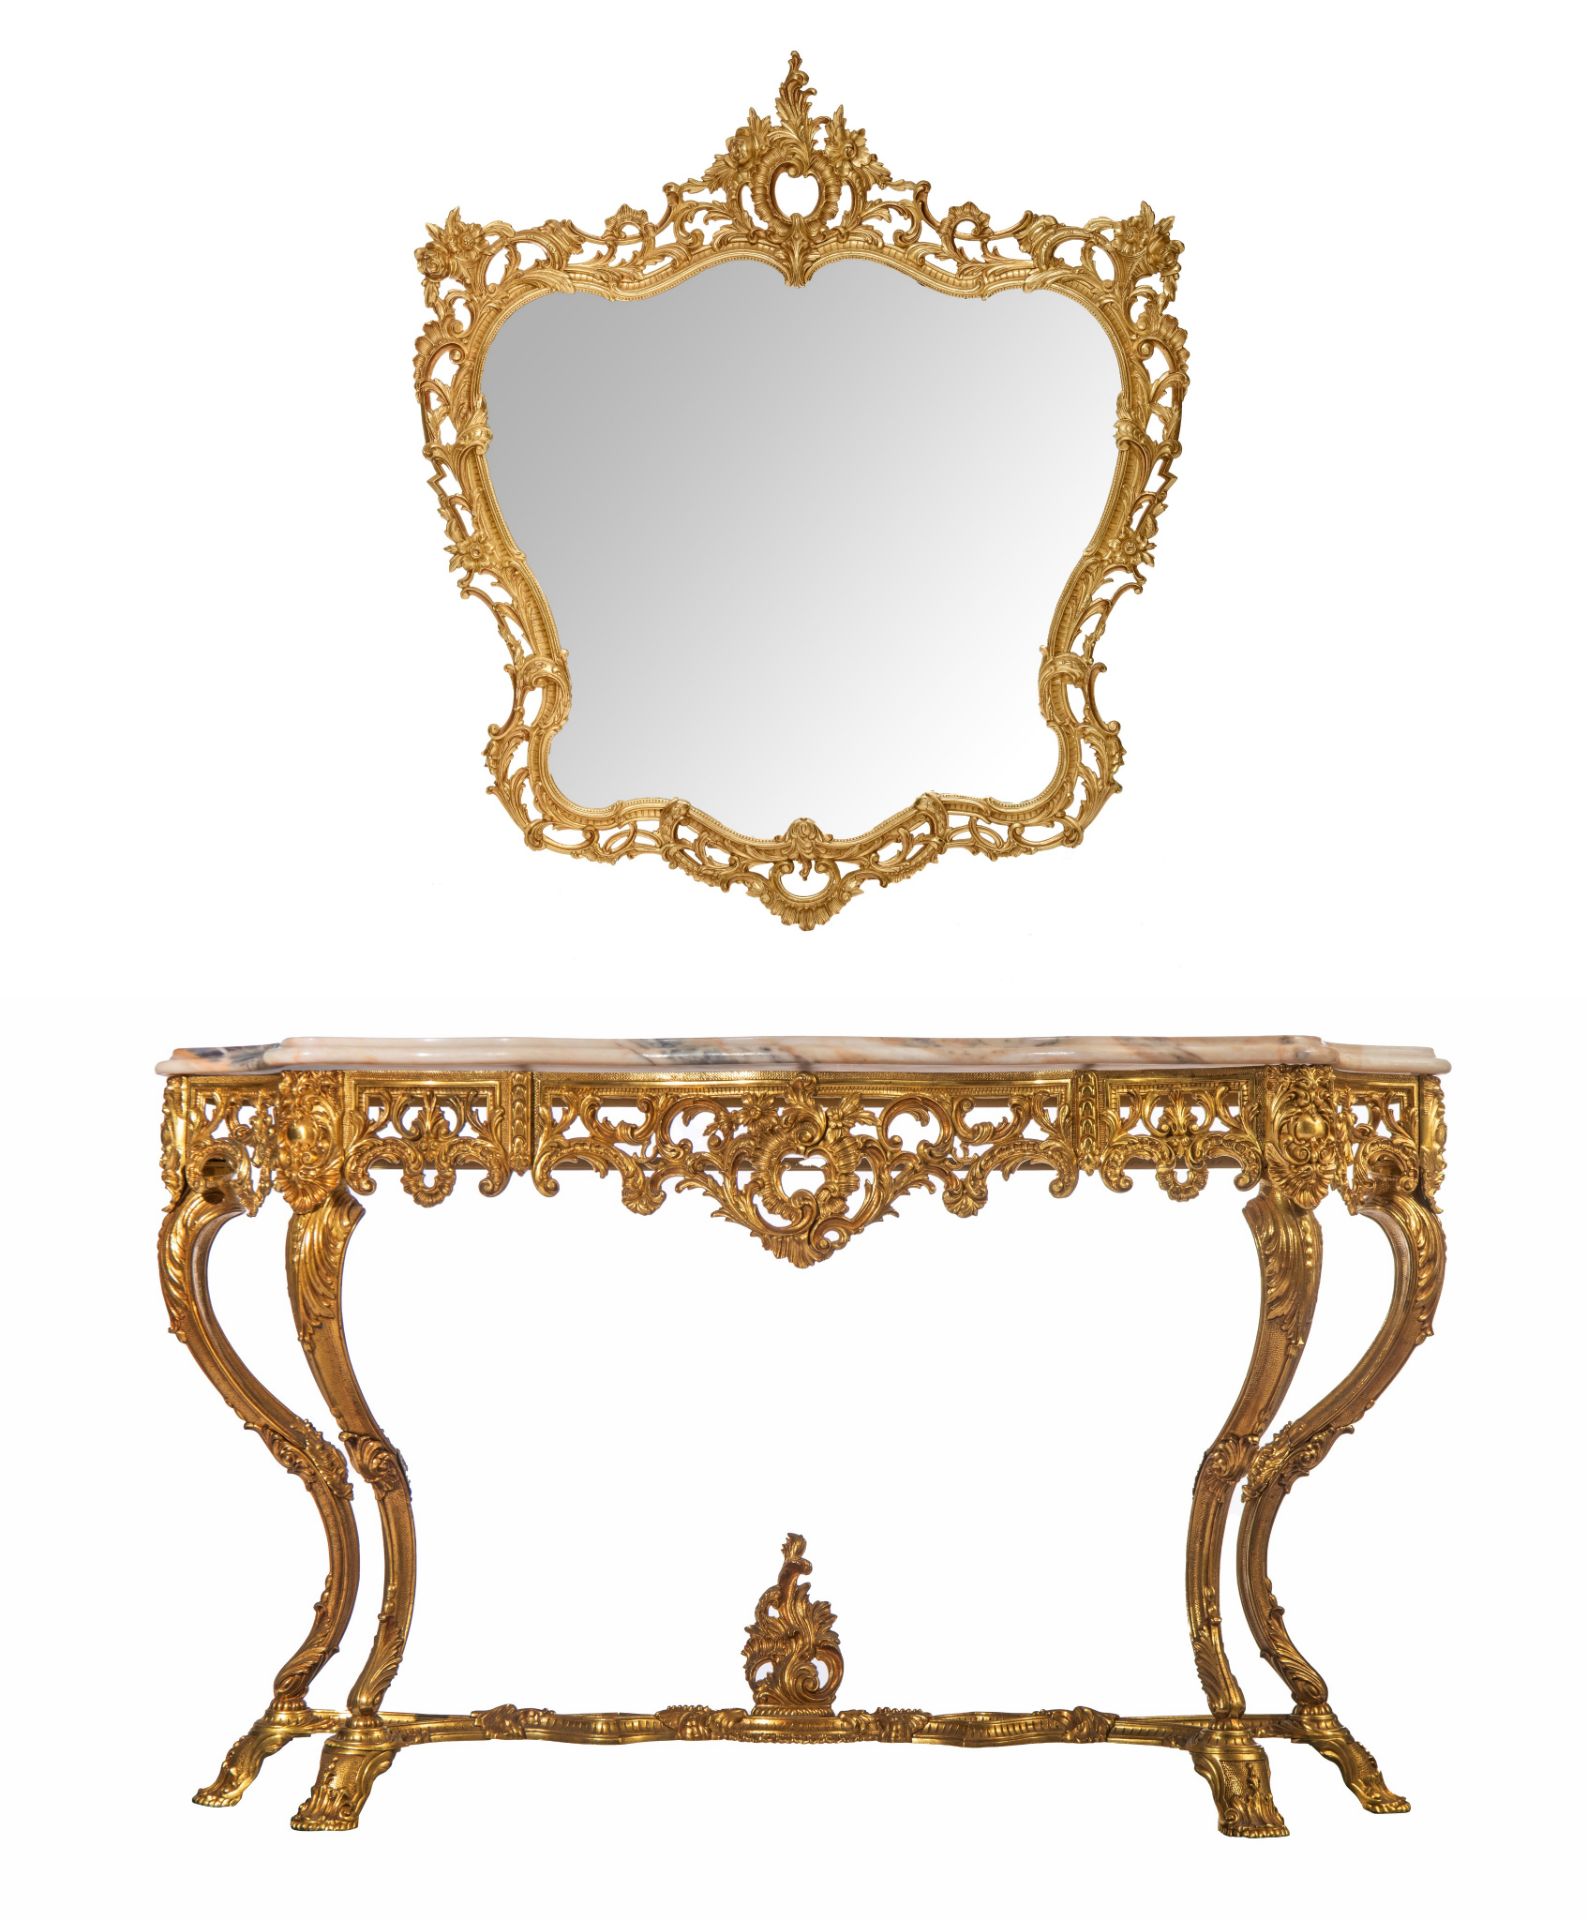 A large Rococo style gilt metal console table and mirror, H 125 - W 110 cm (the mirror) - H 85 - W 1